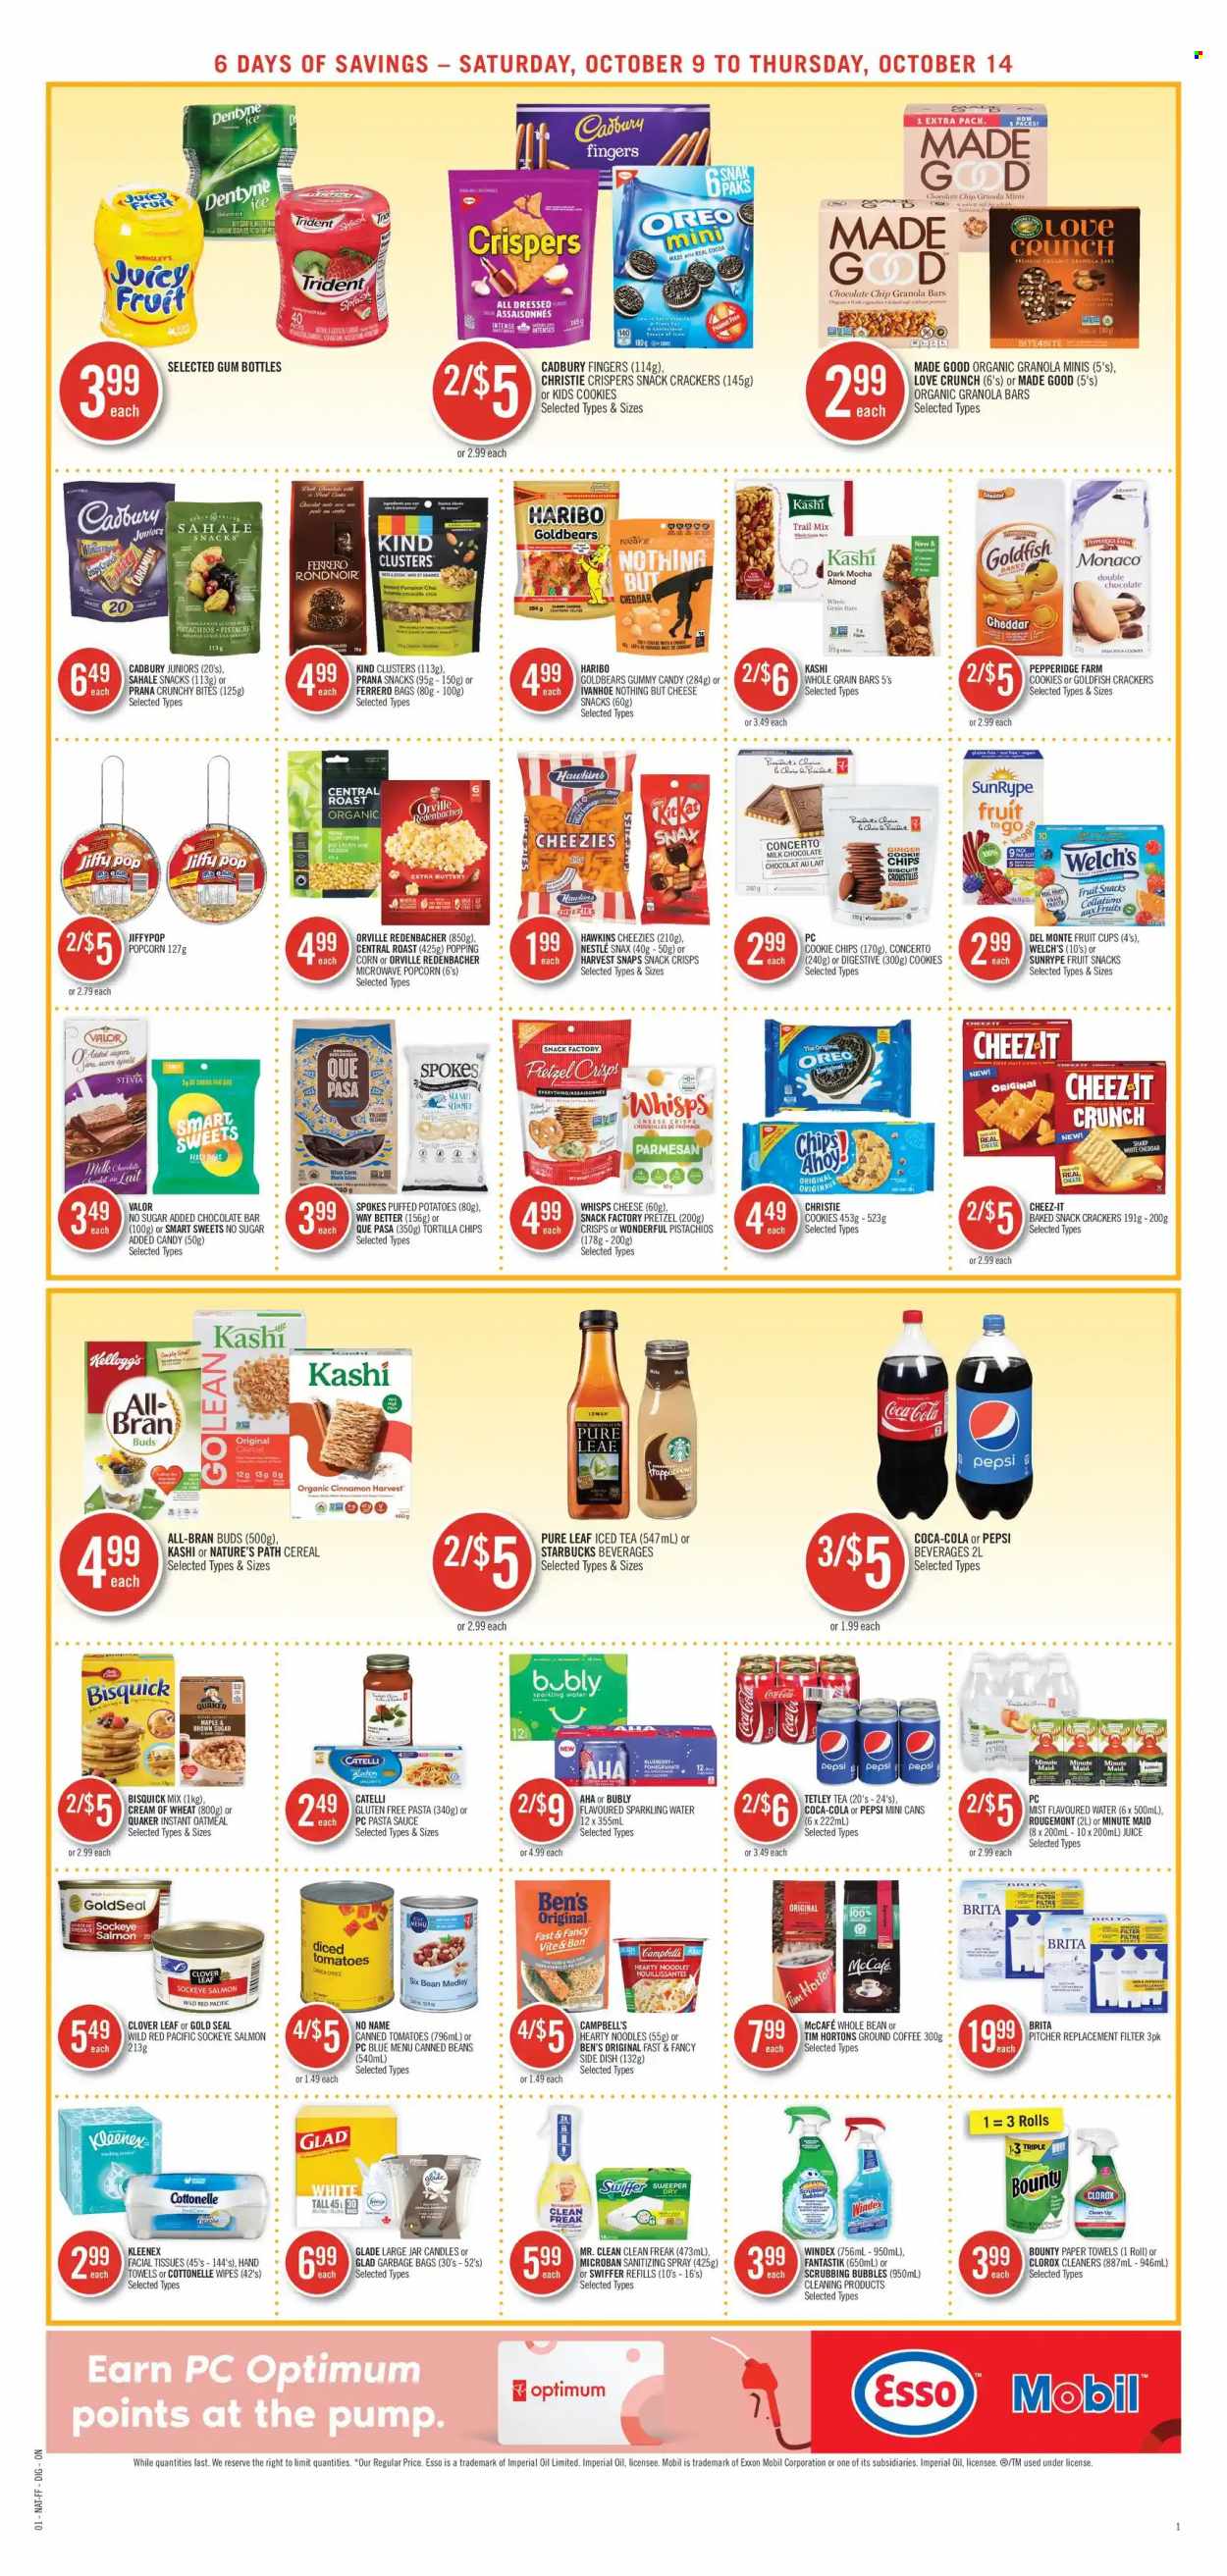 thumbnail - Shoppers Drug Mart Flyer - October 09, 2021 - October 14, 2021 - Sales products - cookies, milk chocolate, pretzels, Haribo, Bounty, crackers, biscuit, Cadbury, Digestive, Trident, Welch's, fruit snack, chocolate bar, tortilla chips, popcorn, Goldfish, Cheez-It, Bisquick, oatmeal, Harvest Snaps, corn, salmon, pumpkin, pasta sauce, sauce, cereals, Cream of Wheat, granola bar, Quaker, All-Bran, noodles, ginger, cinnamon, Campbell's, pistachios, trail mix, Coca-Cola, Pepsi, juice, ice tea, Clover, fruit punch, Pure Leaf, coffee, ground coffee, Starbucks, McCafe, wipes, Cottonelle, Kleenex, tissues, kitchen towels, paper towels, Windex, Scrubbing Bubbles, Clorox, Swiffer, facial tissues, Nestlé, Oreo, chips, Ferrero Rocher. Page 8.